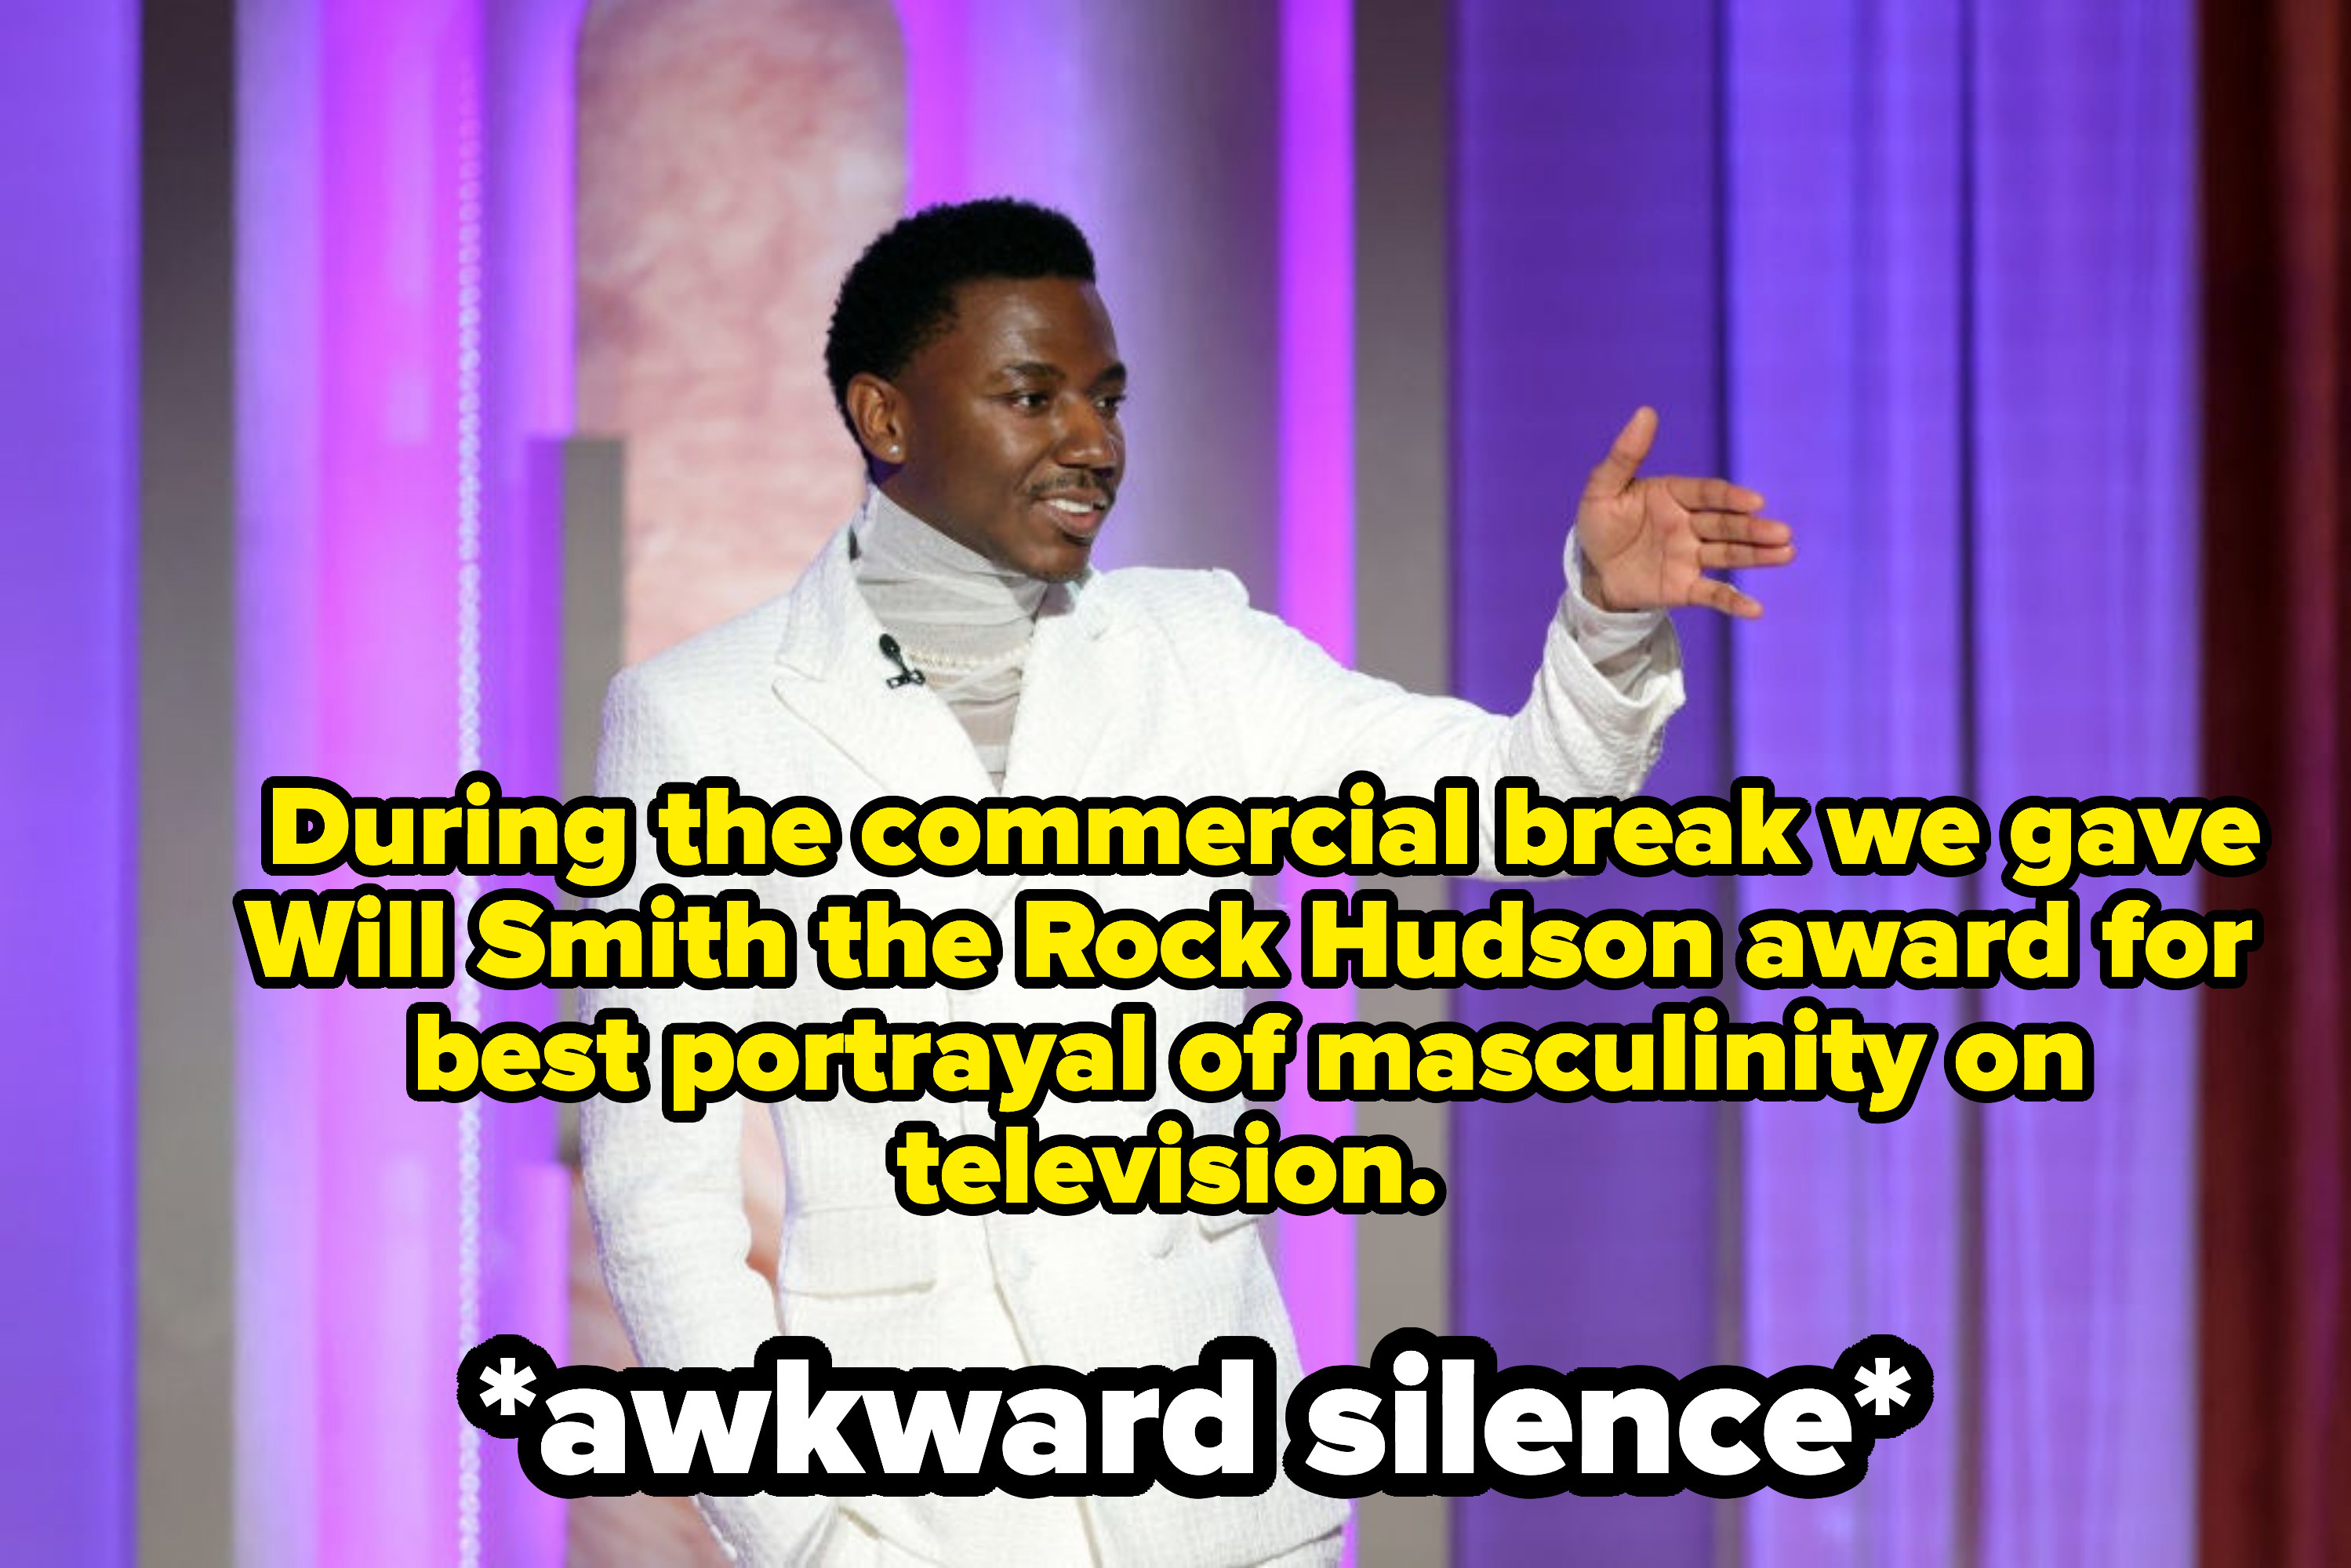 &quot;during the commercial break we gave will smith the Rock Hudson award for best portrayal of masculinity on television&quot;